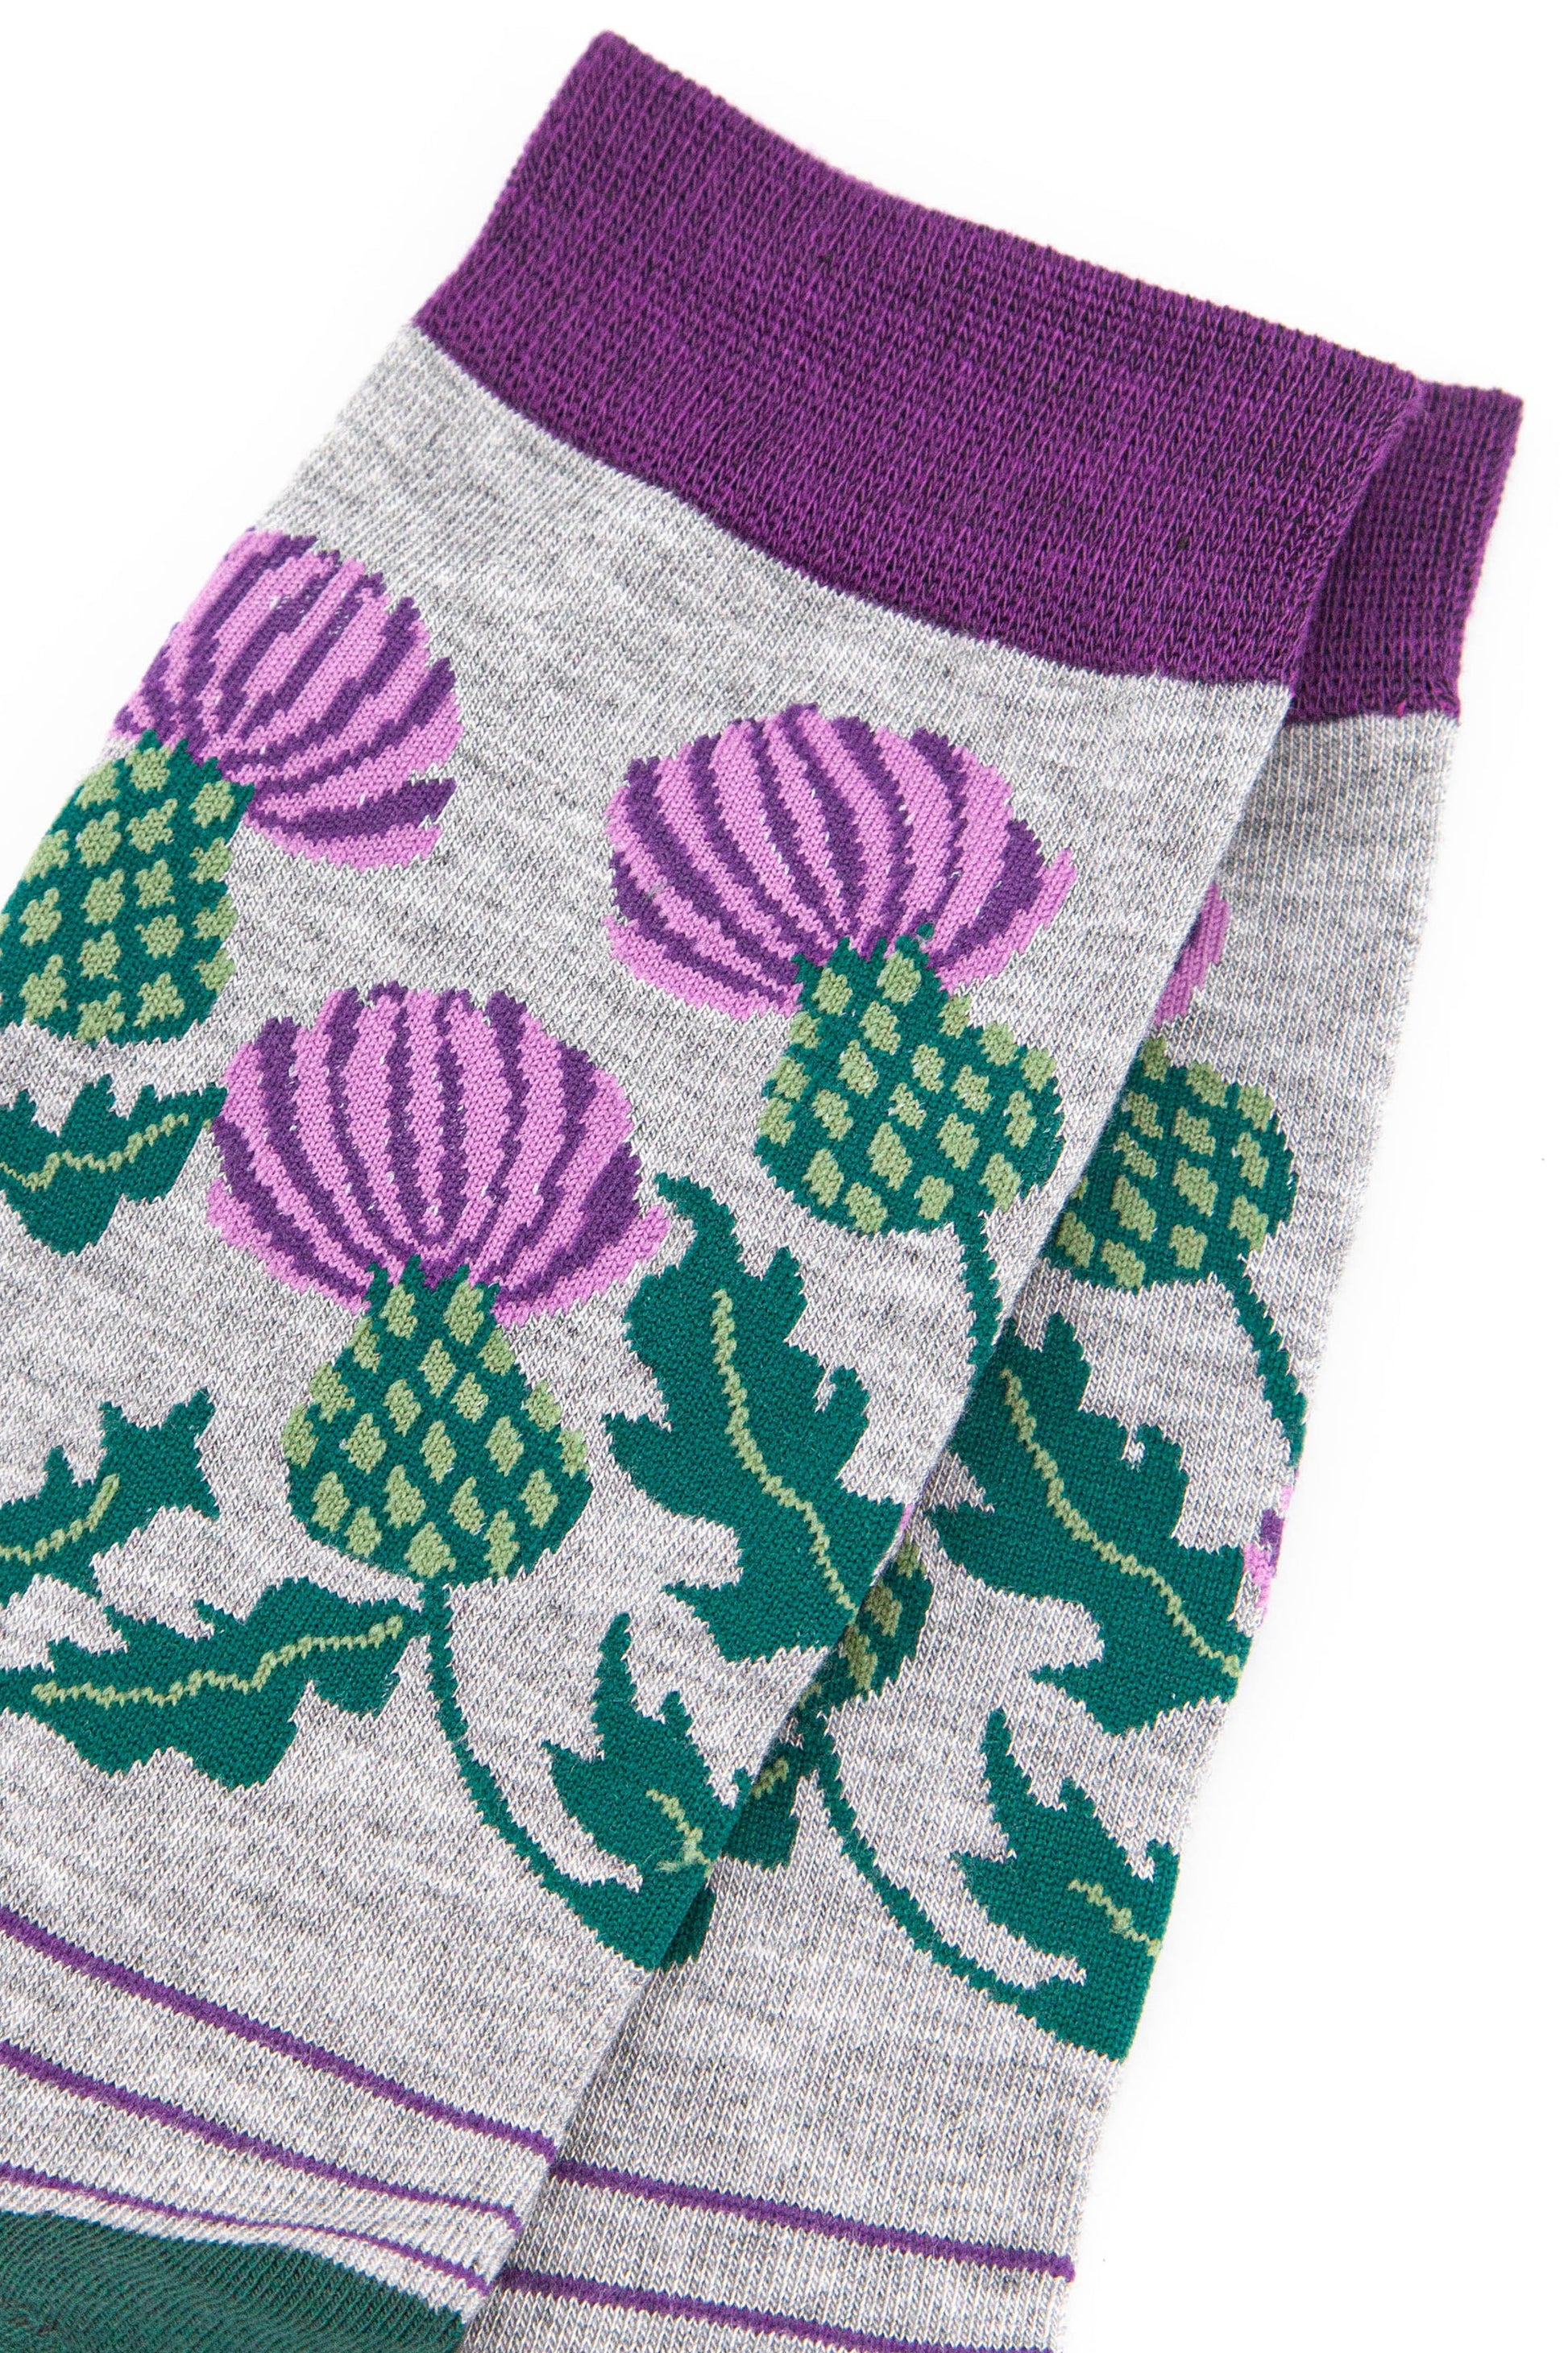 close up of the scottish thistle design on the ankle of the socks